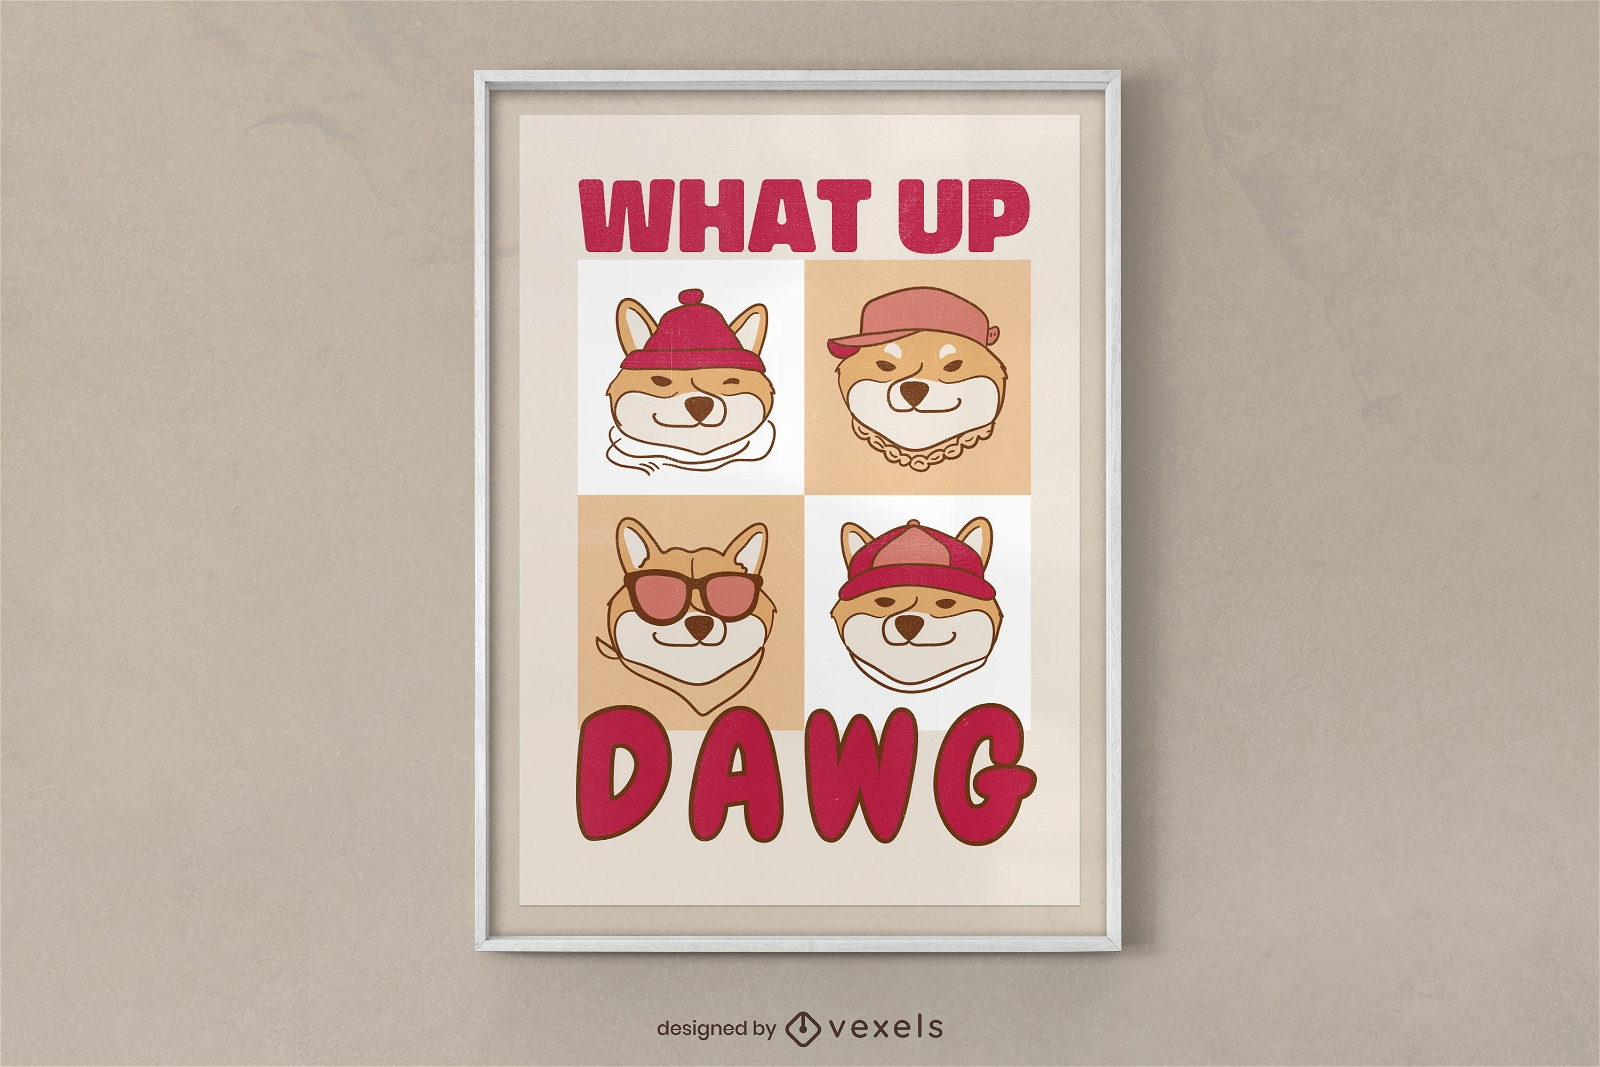 What up dawg? dog characters poster design